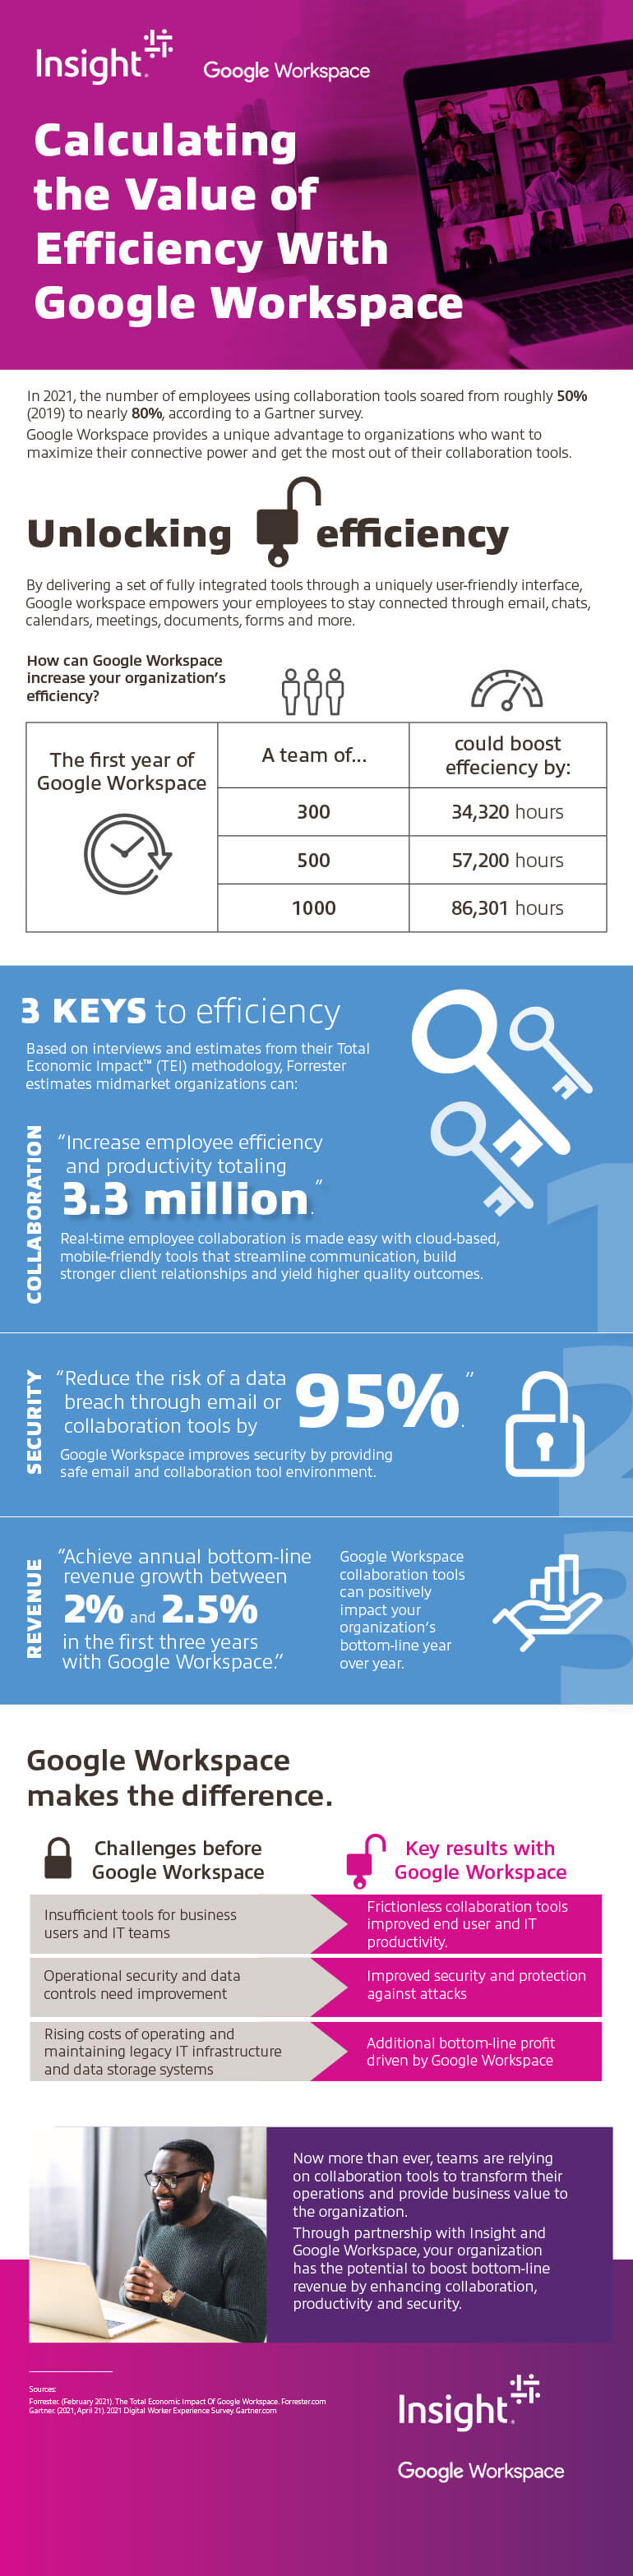 Google Calculating the Value of Efficiency With Google Workspace infographic as translated below